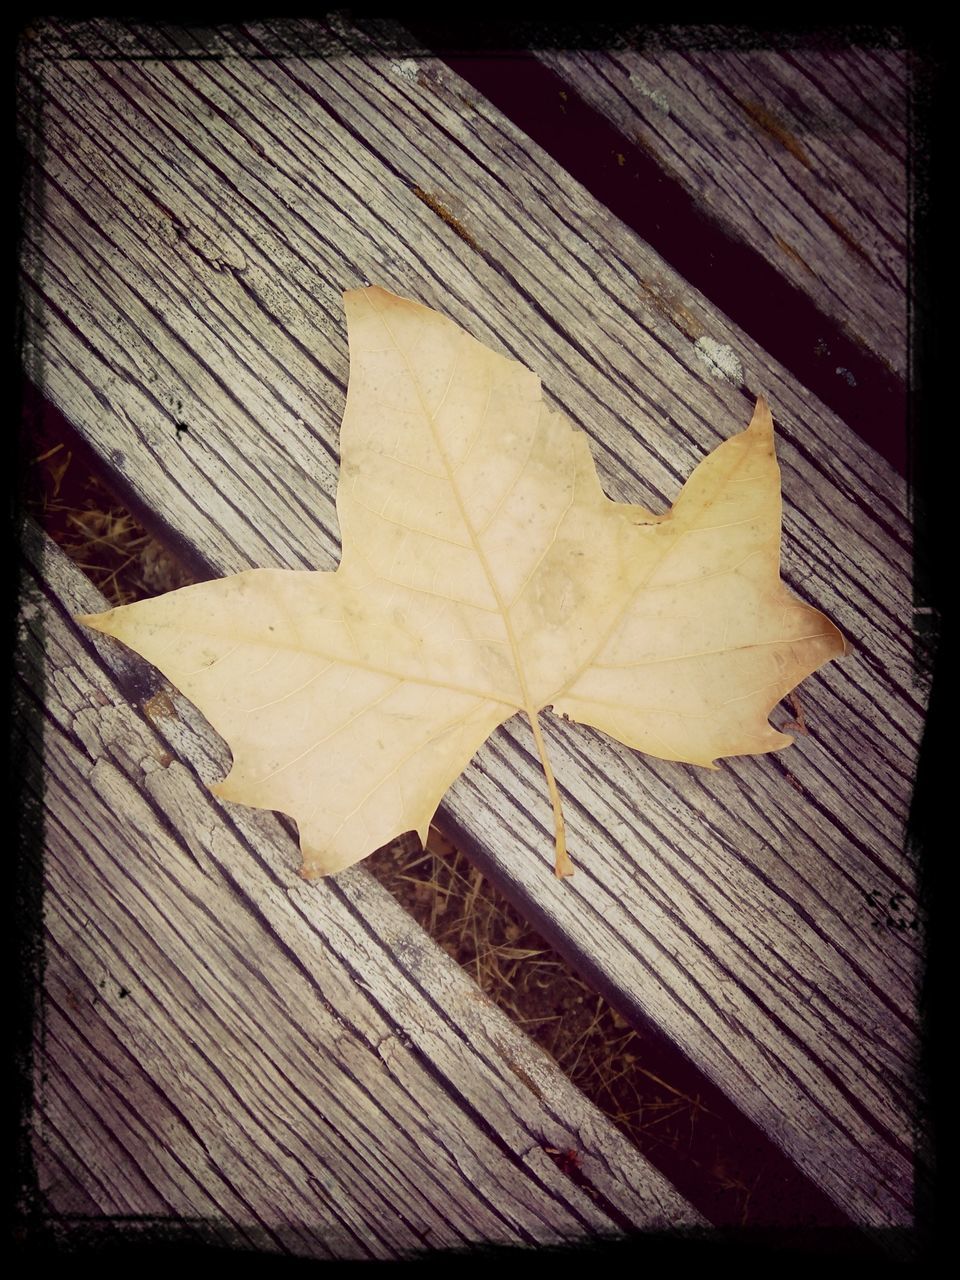 transfer print, wood - material, auto post production filter, leaf, plank, wooden, dry, autumn, high angle view, wood, close-up, textured, outdoors, fallen, day, no people, pattern, nature, season, damaged